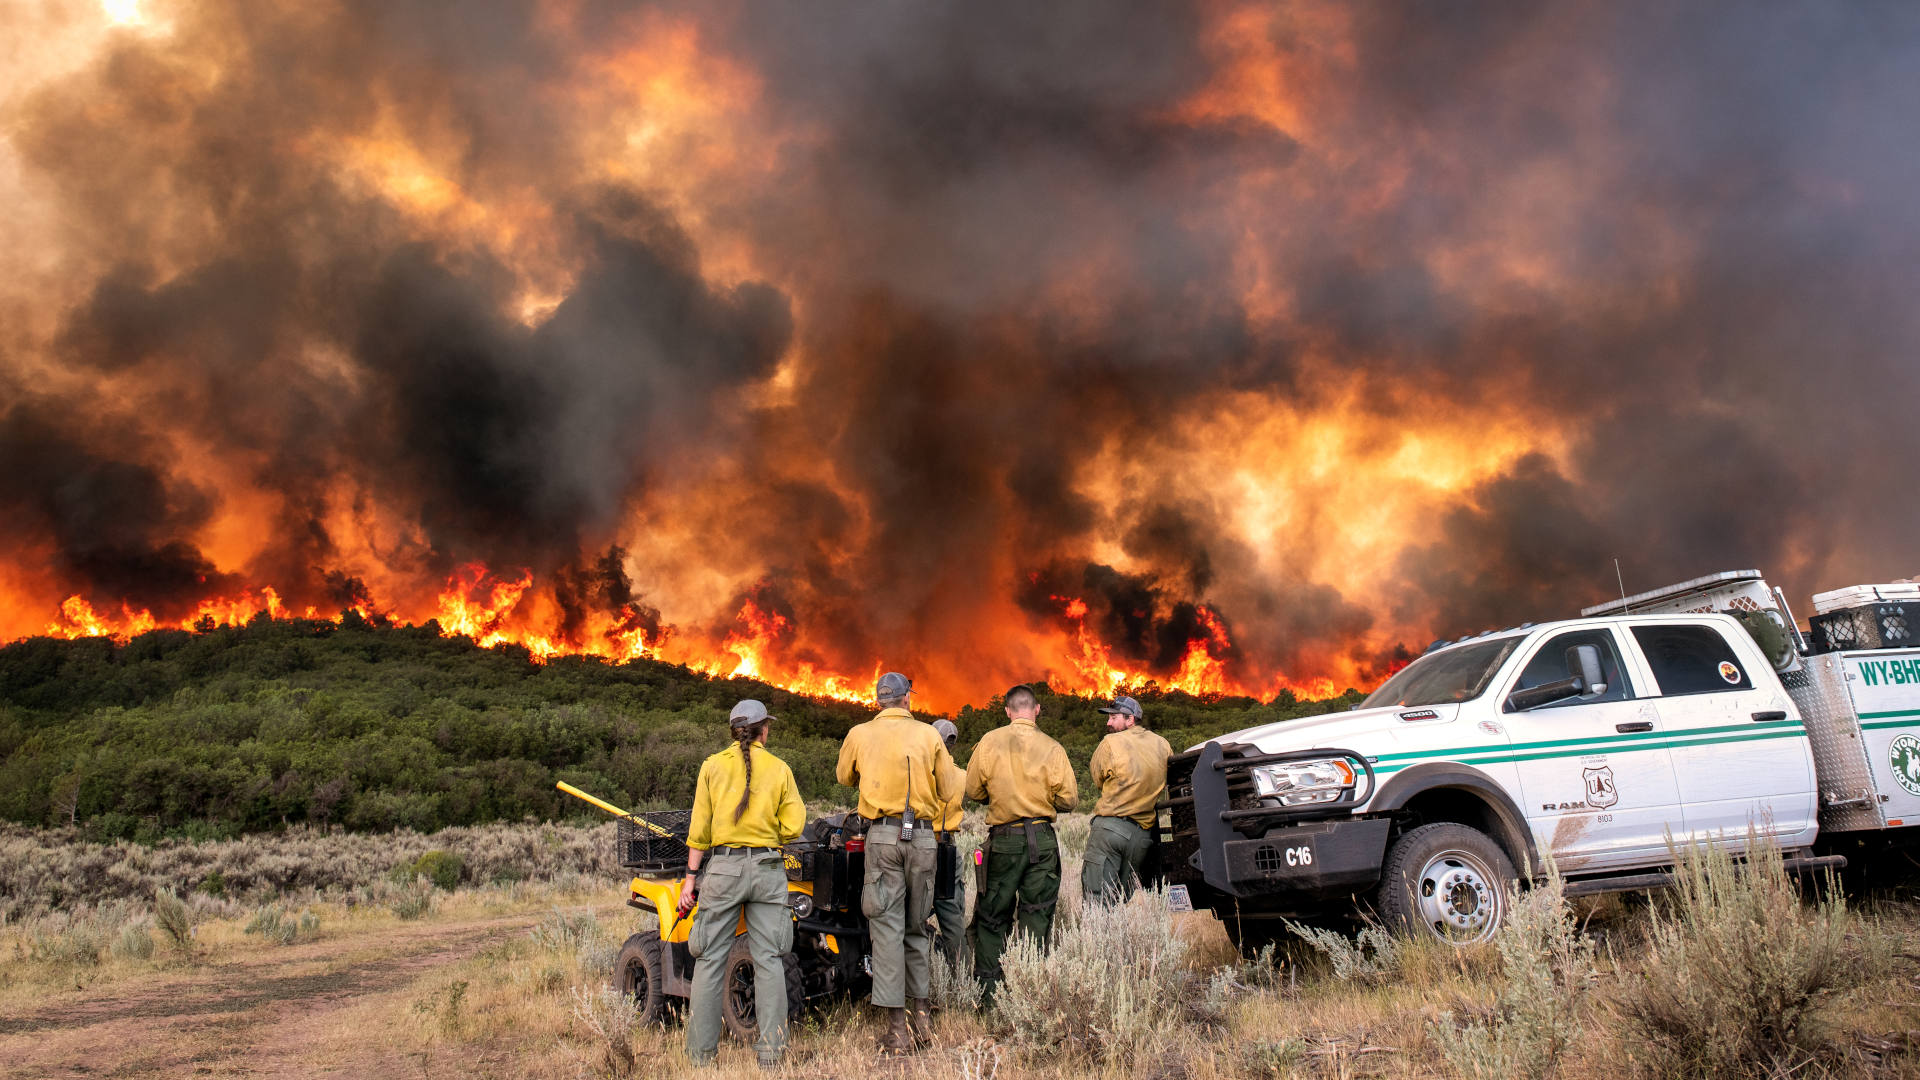 The Pine Gulch fire in Colorado burned more than 139,000 acres this year. It is the largest fire in the state's history.